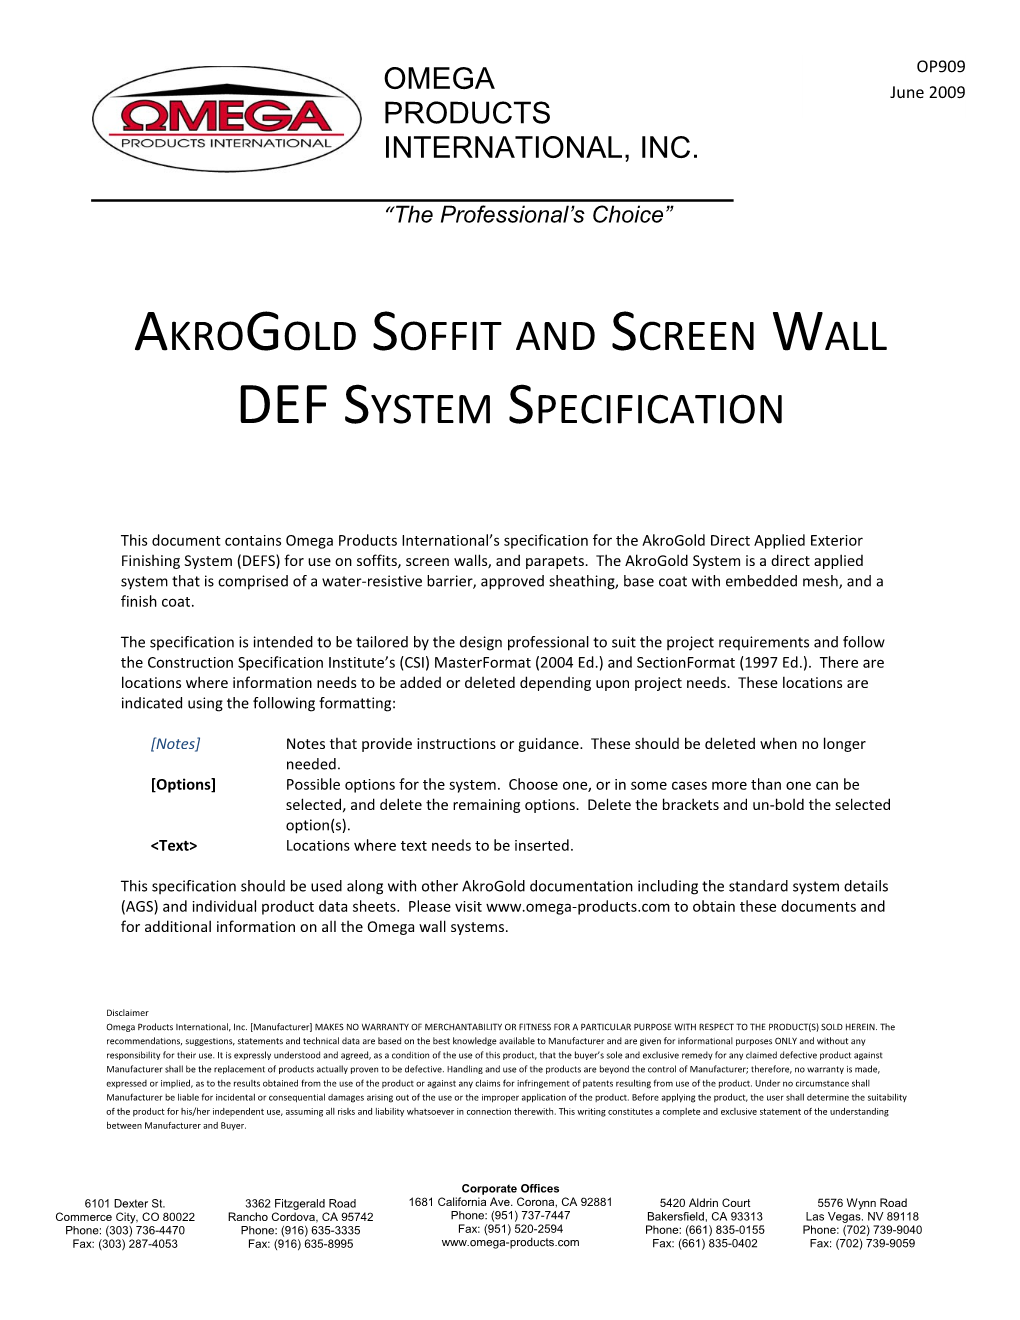 Akrogold Soffit and Screen Wall DEF System Specification